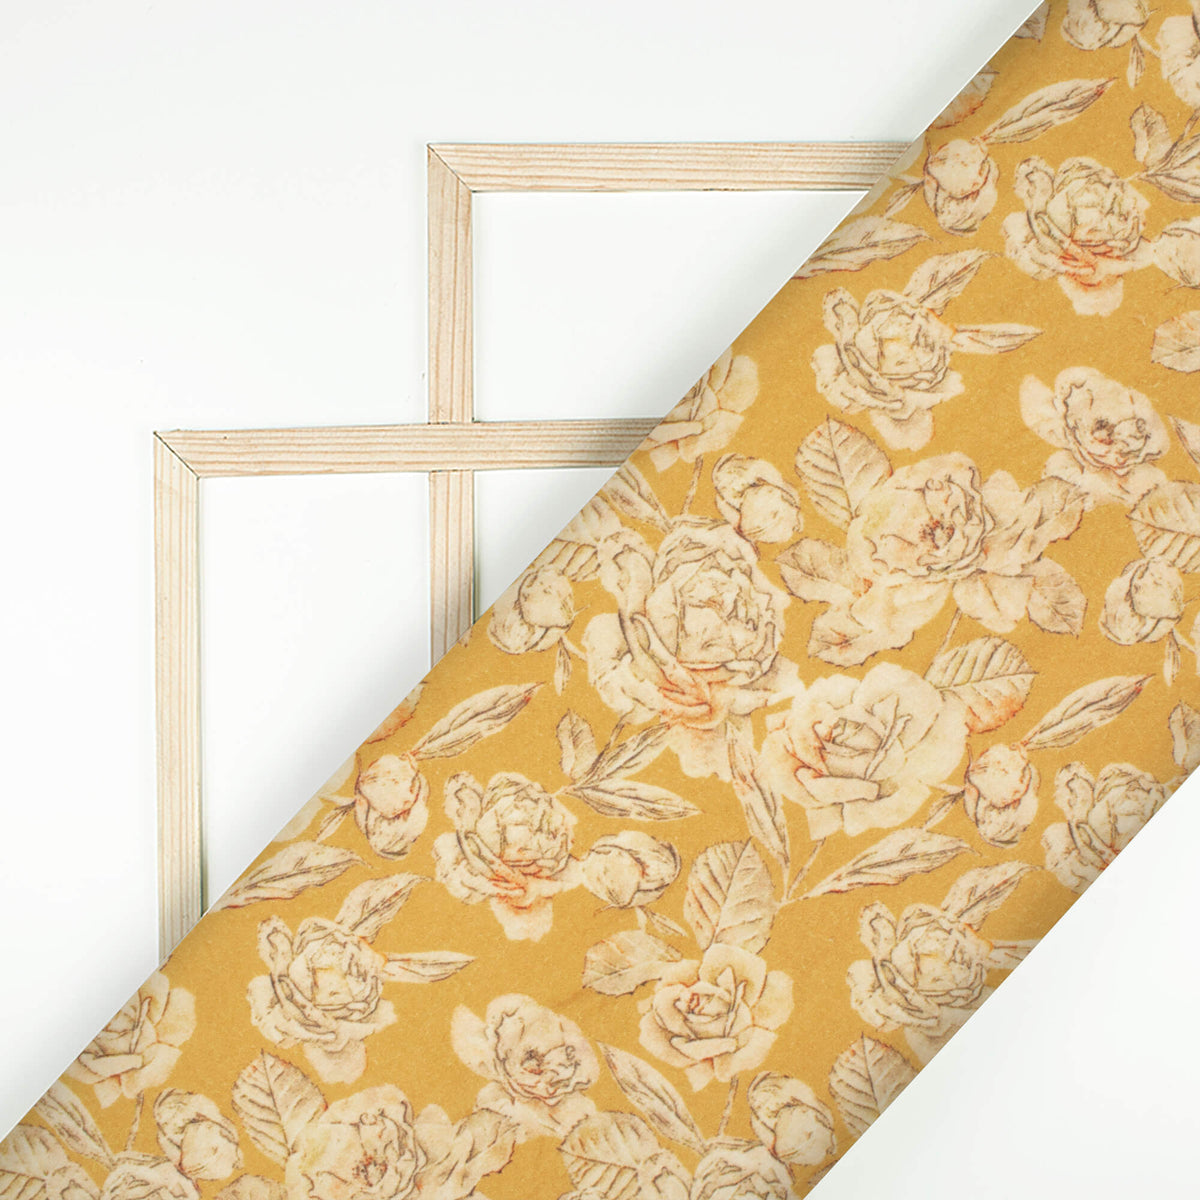 Mustard Yellow And Beige Floral Digital Print Cotton Cambric Fabric